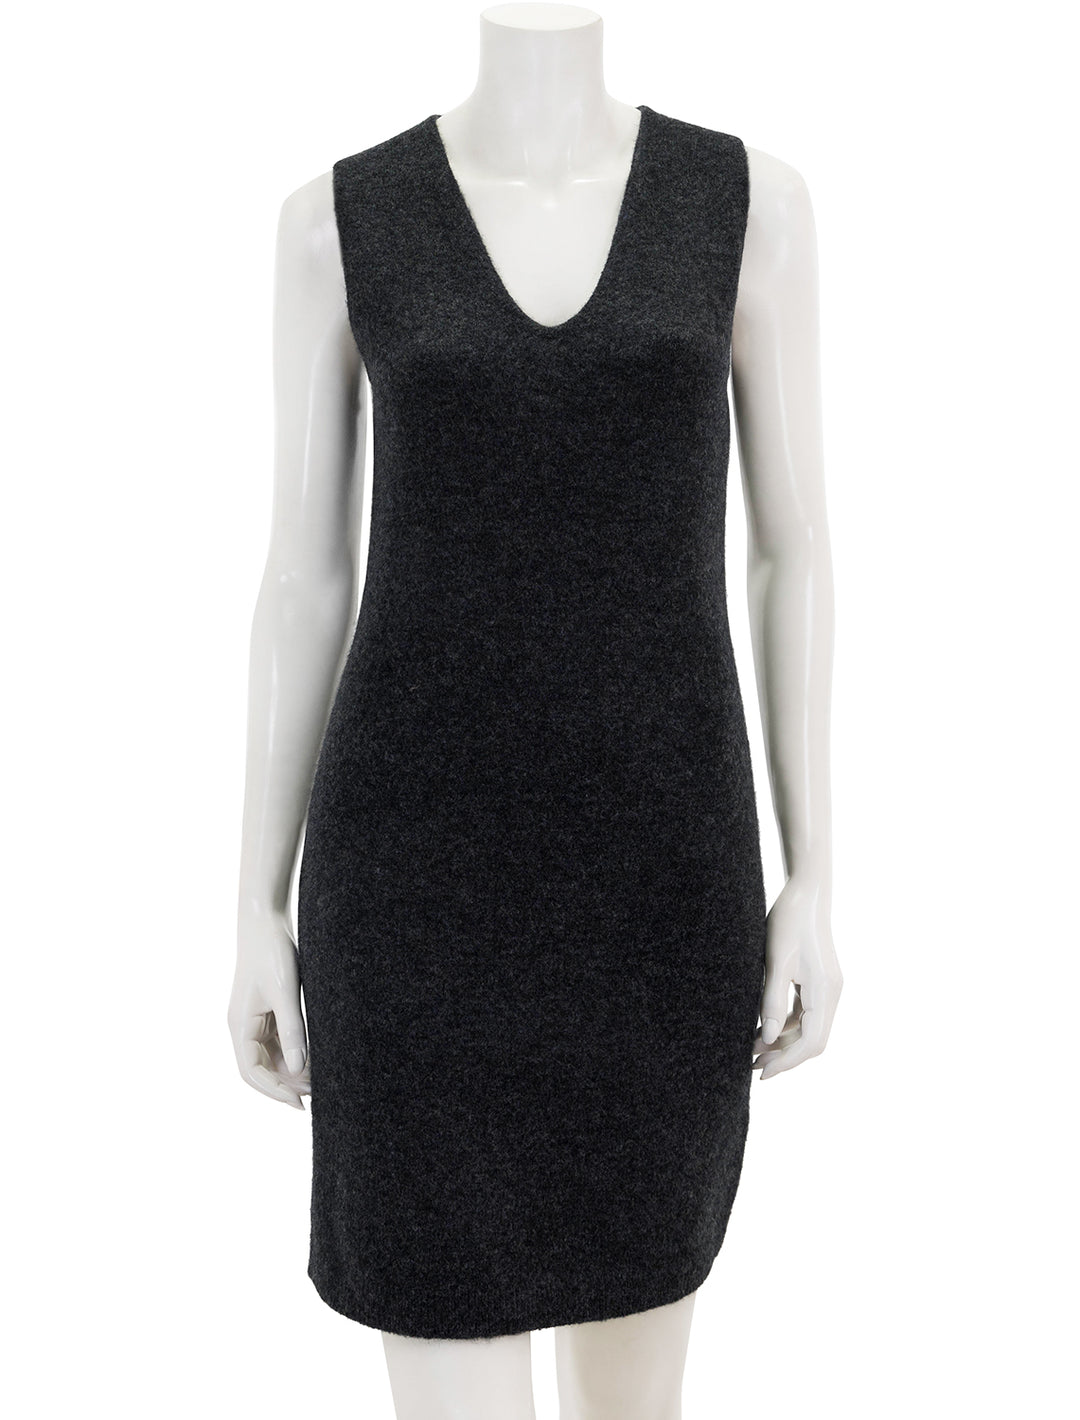 Front view of Theory's plunging v neck tank dress.